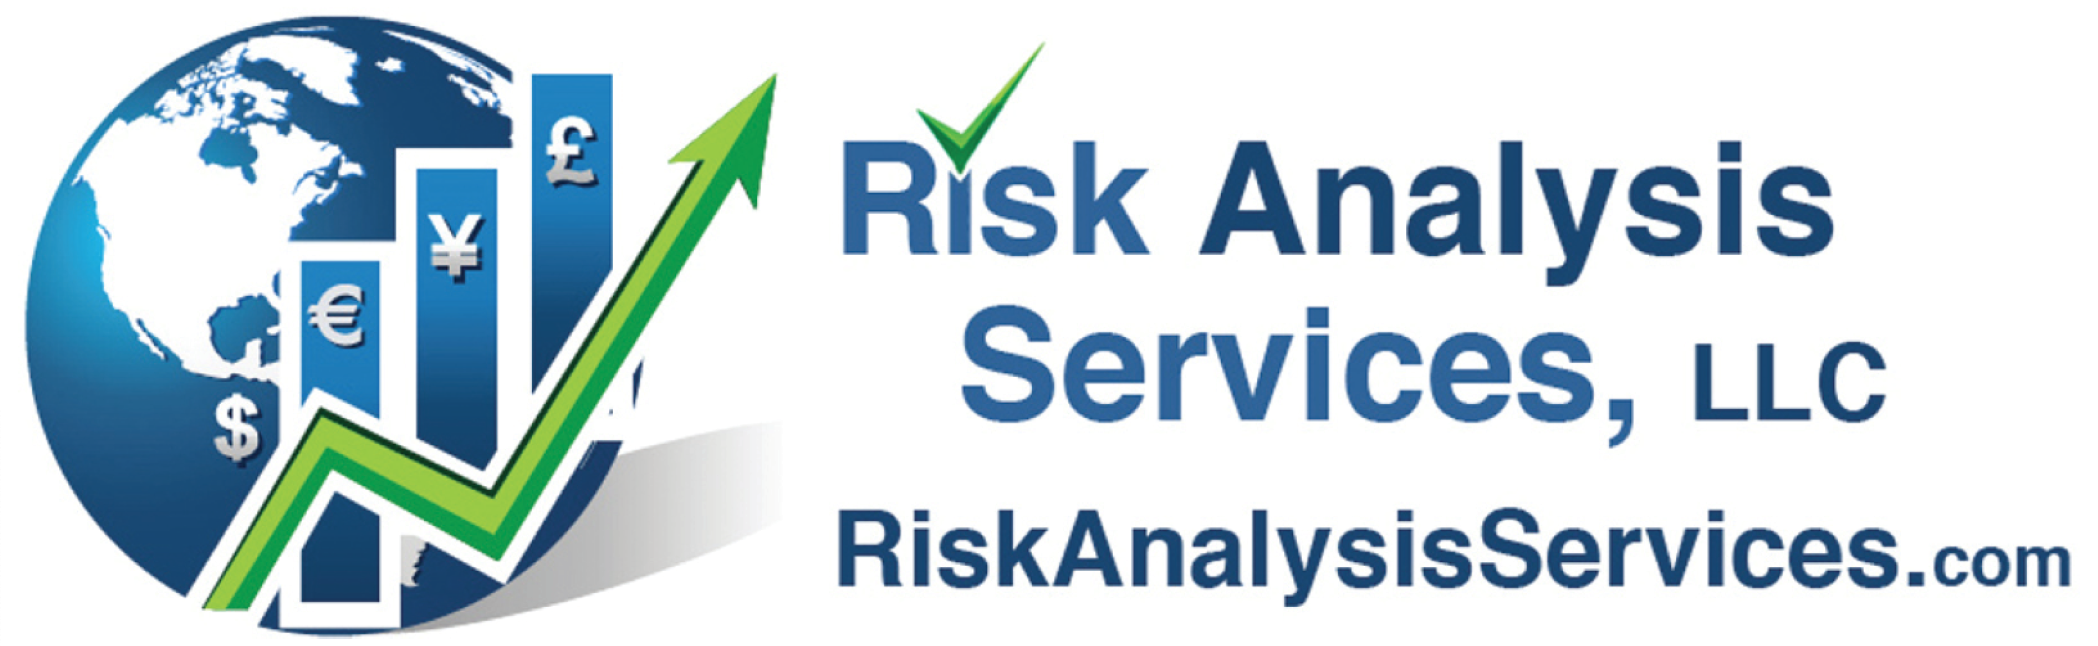 Risk Analysis Services